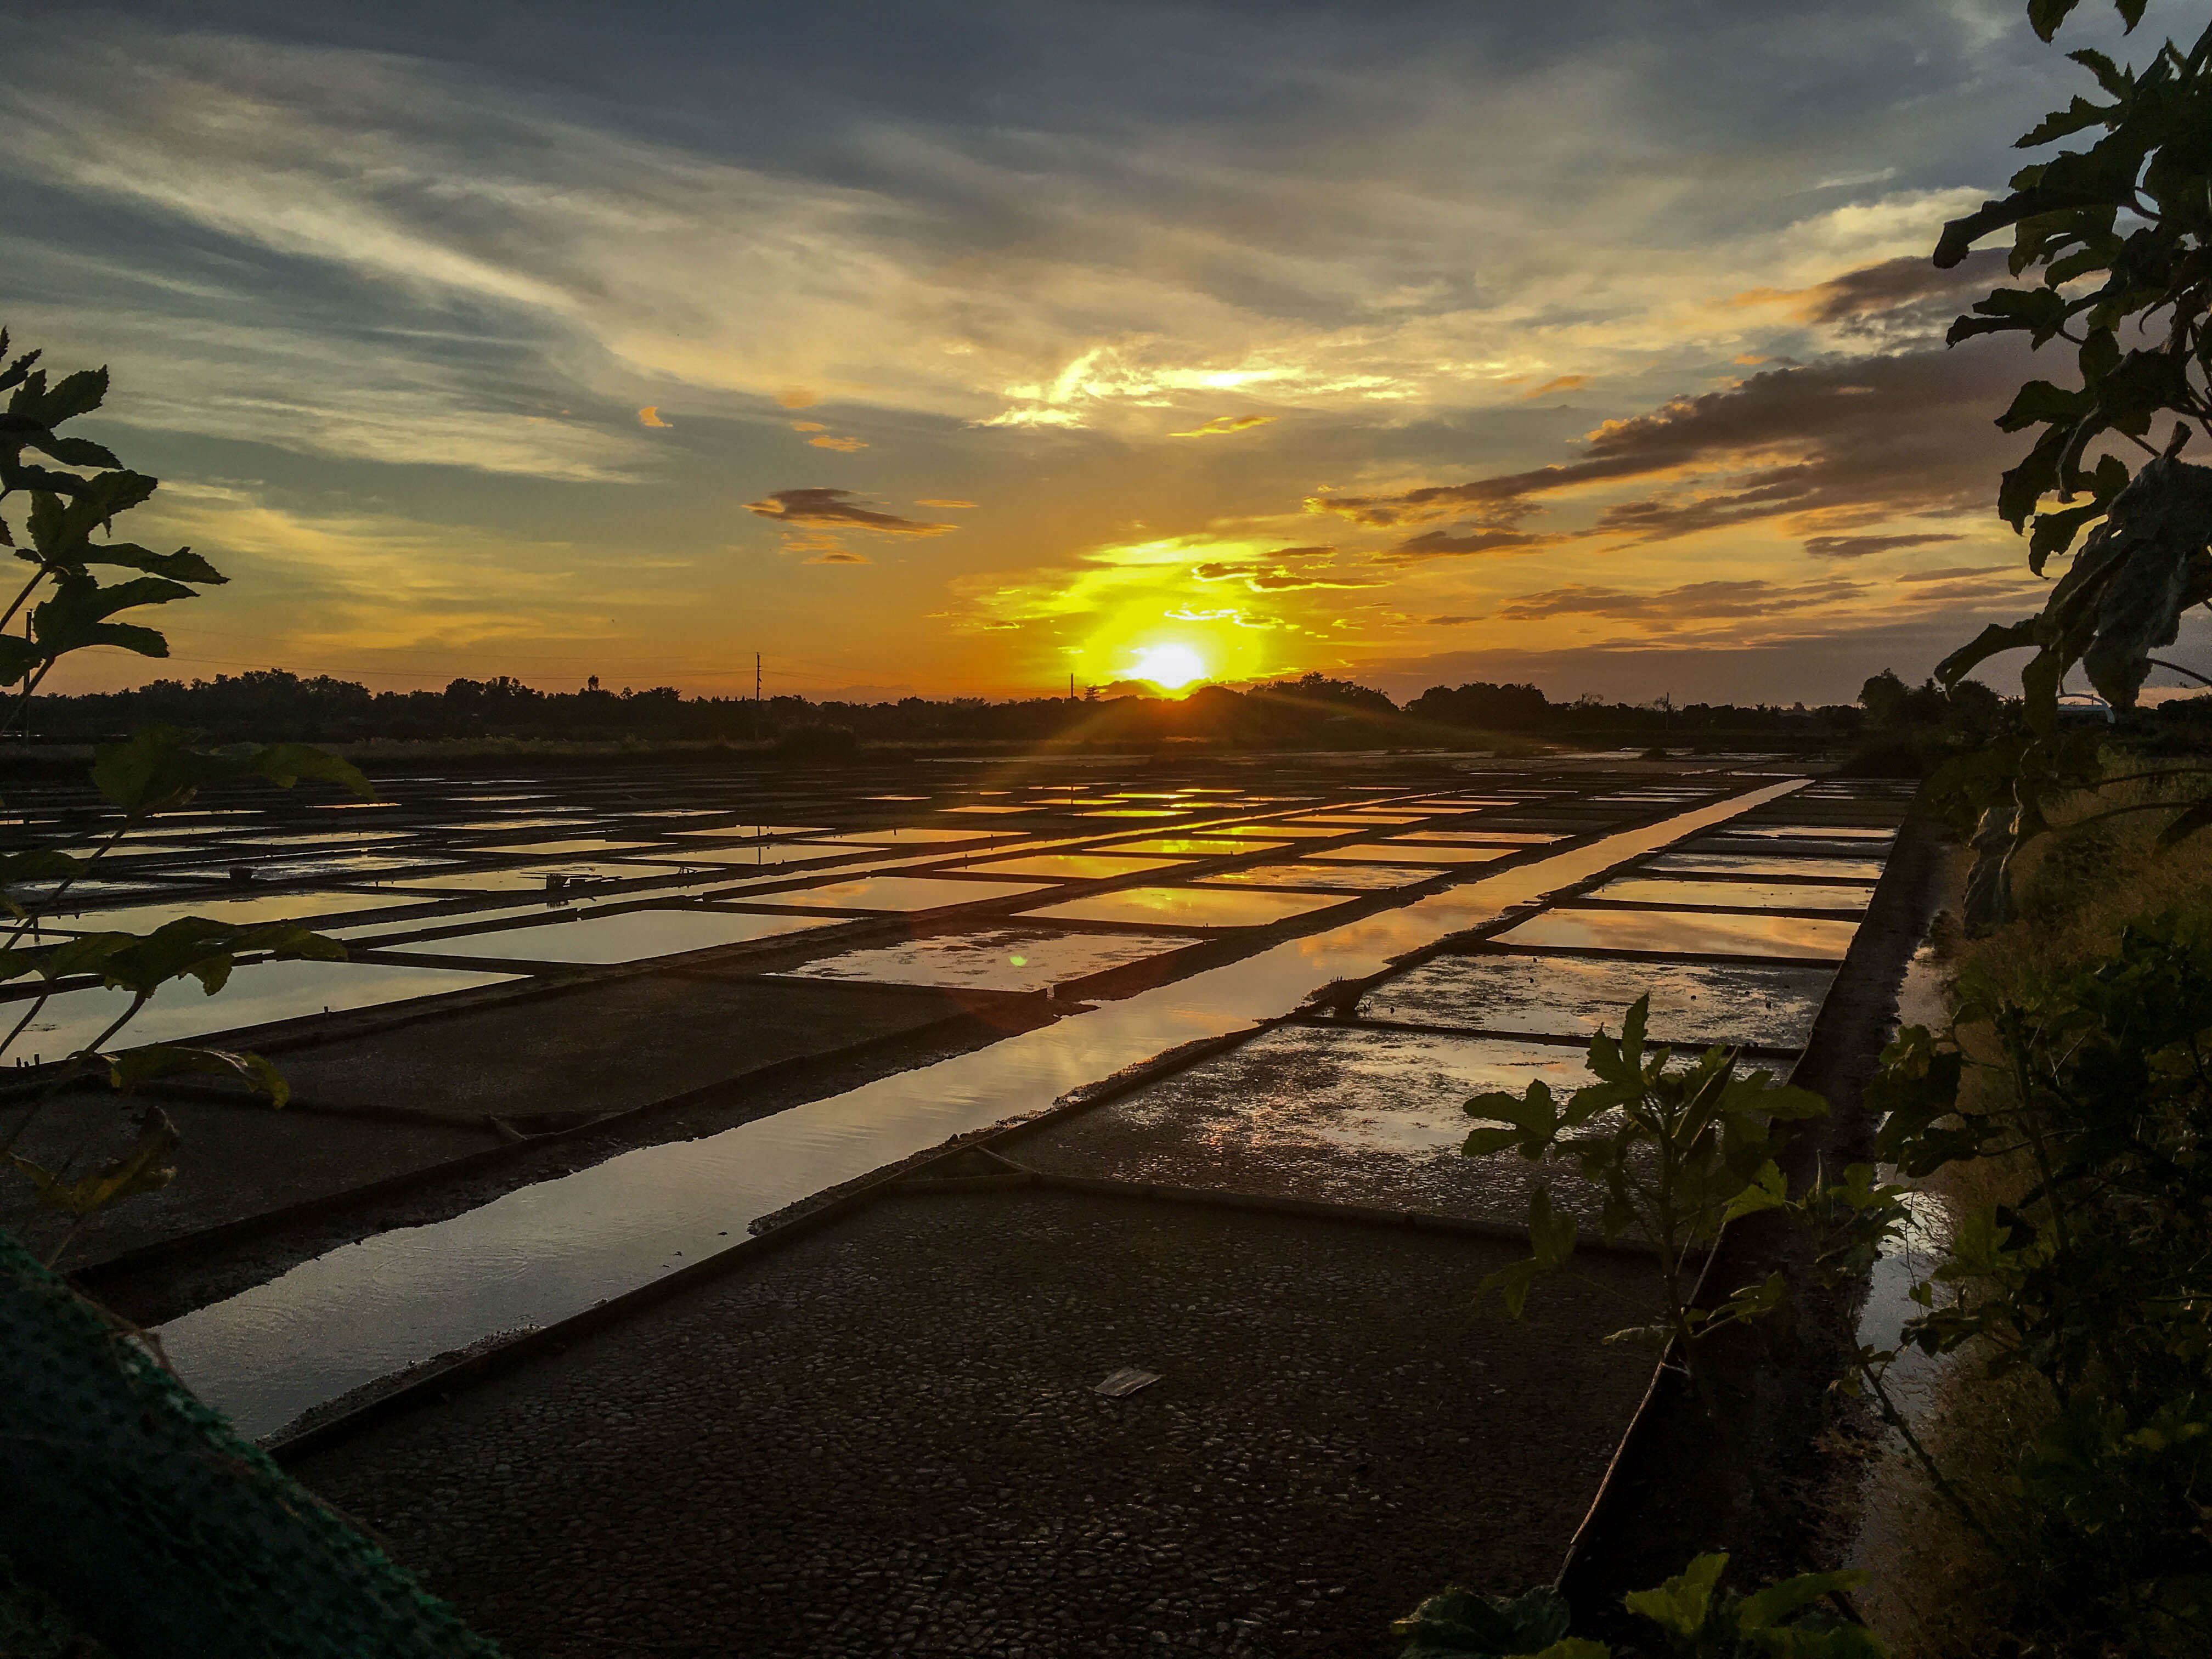 sunset seen in pangasinan philippines over salt farms